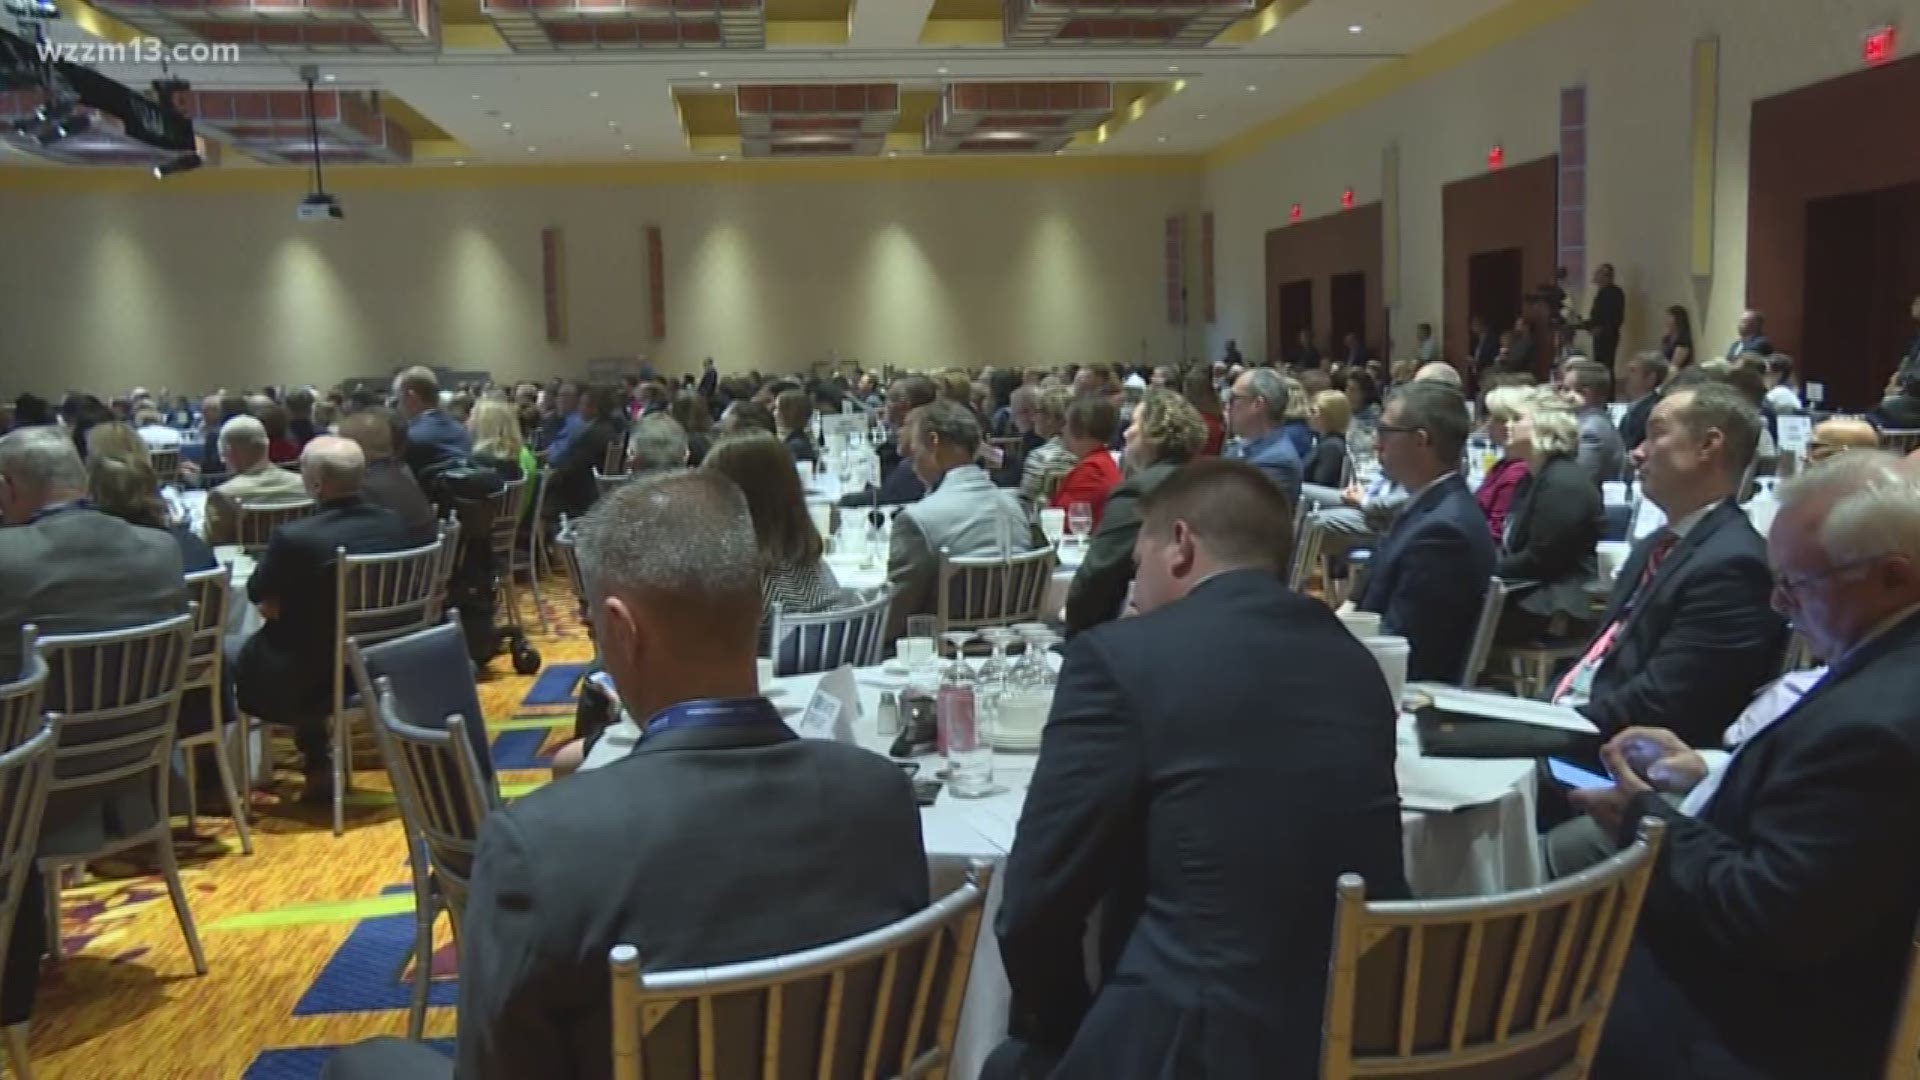 The overall purpose of the event was to boost the economic success of West Michigan.